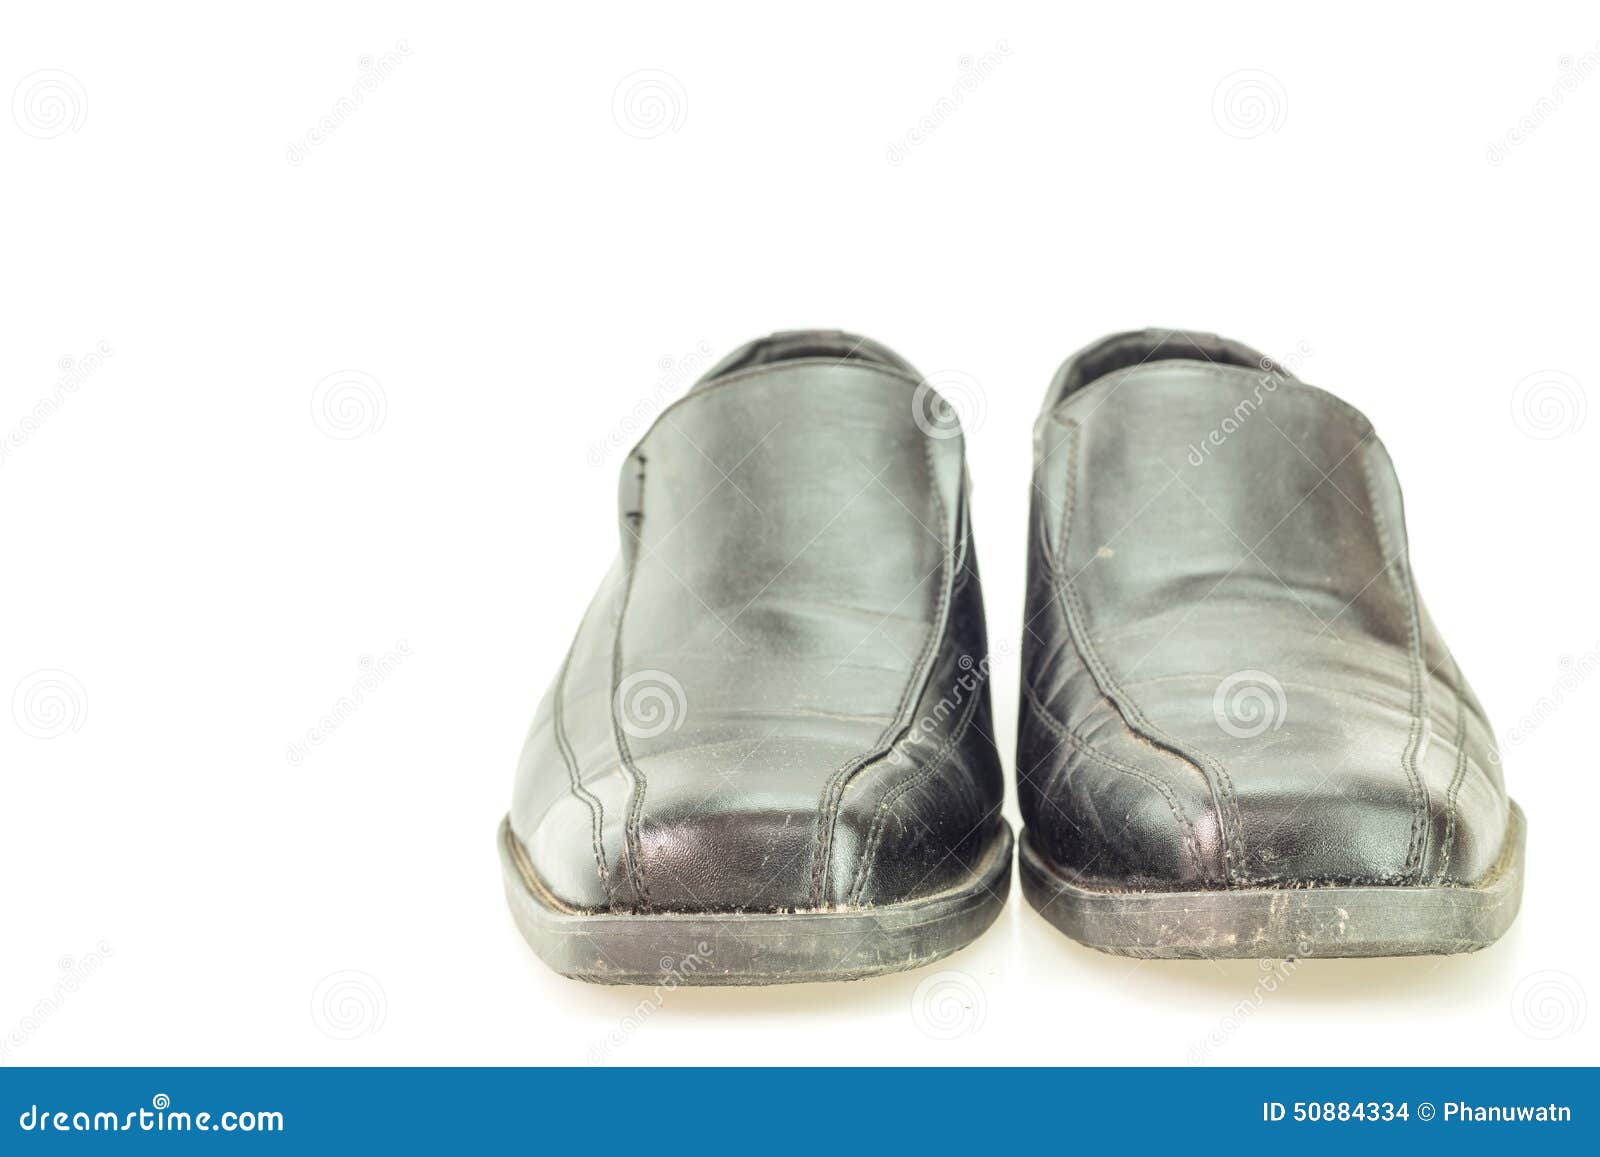 Old black man s shoes stock photo. Image of shoe, formal - 50884334